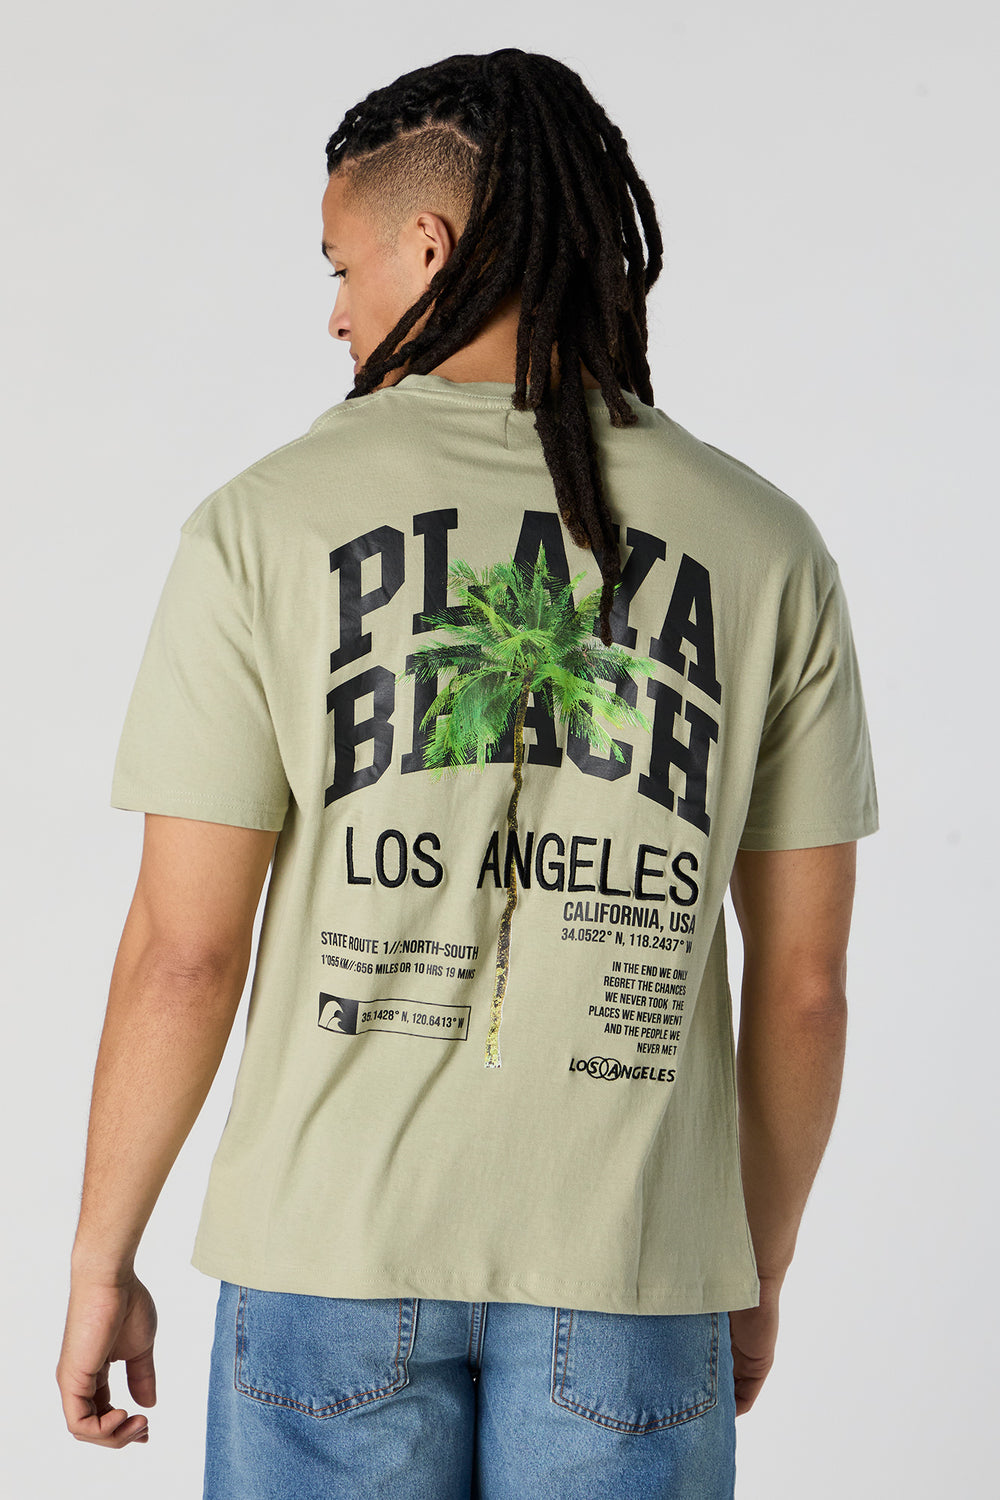 Los Angeles Graphic T-Shirt Los Angeles Graphic T-Shirt 3